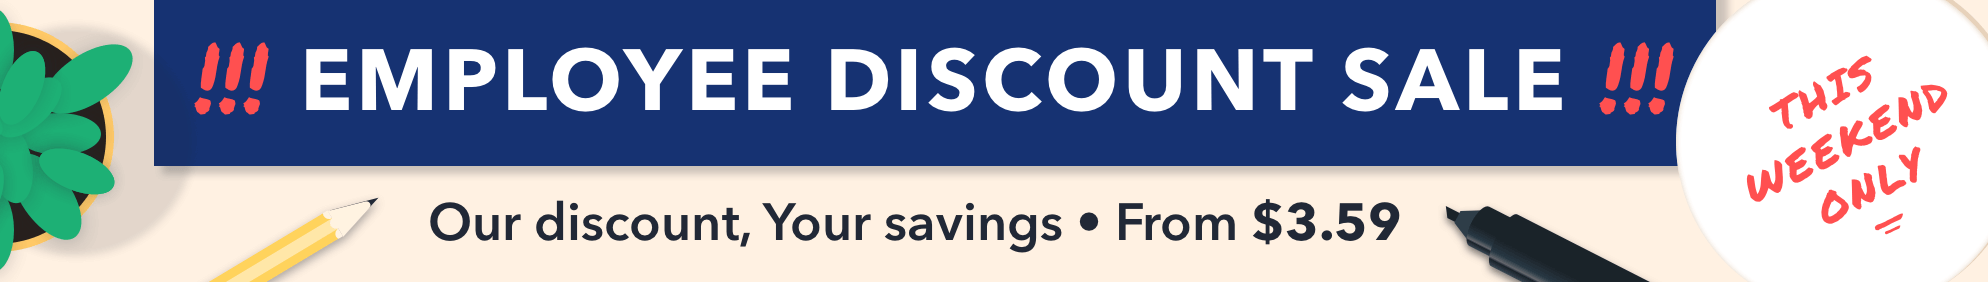 the-employee-discount-subscription-sale-frugal-living-nw